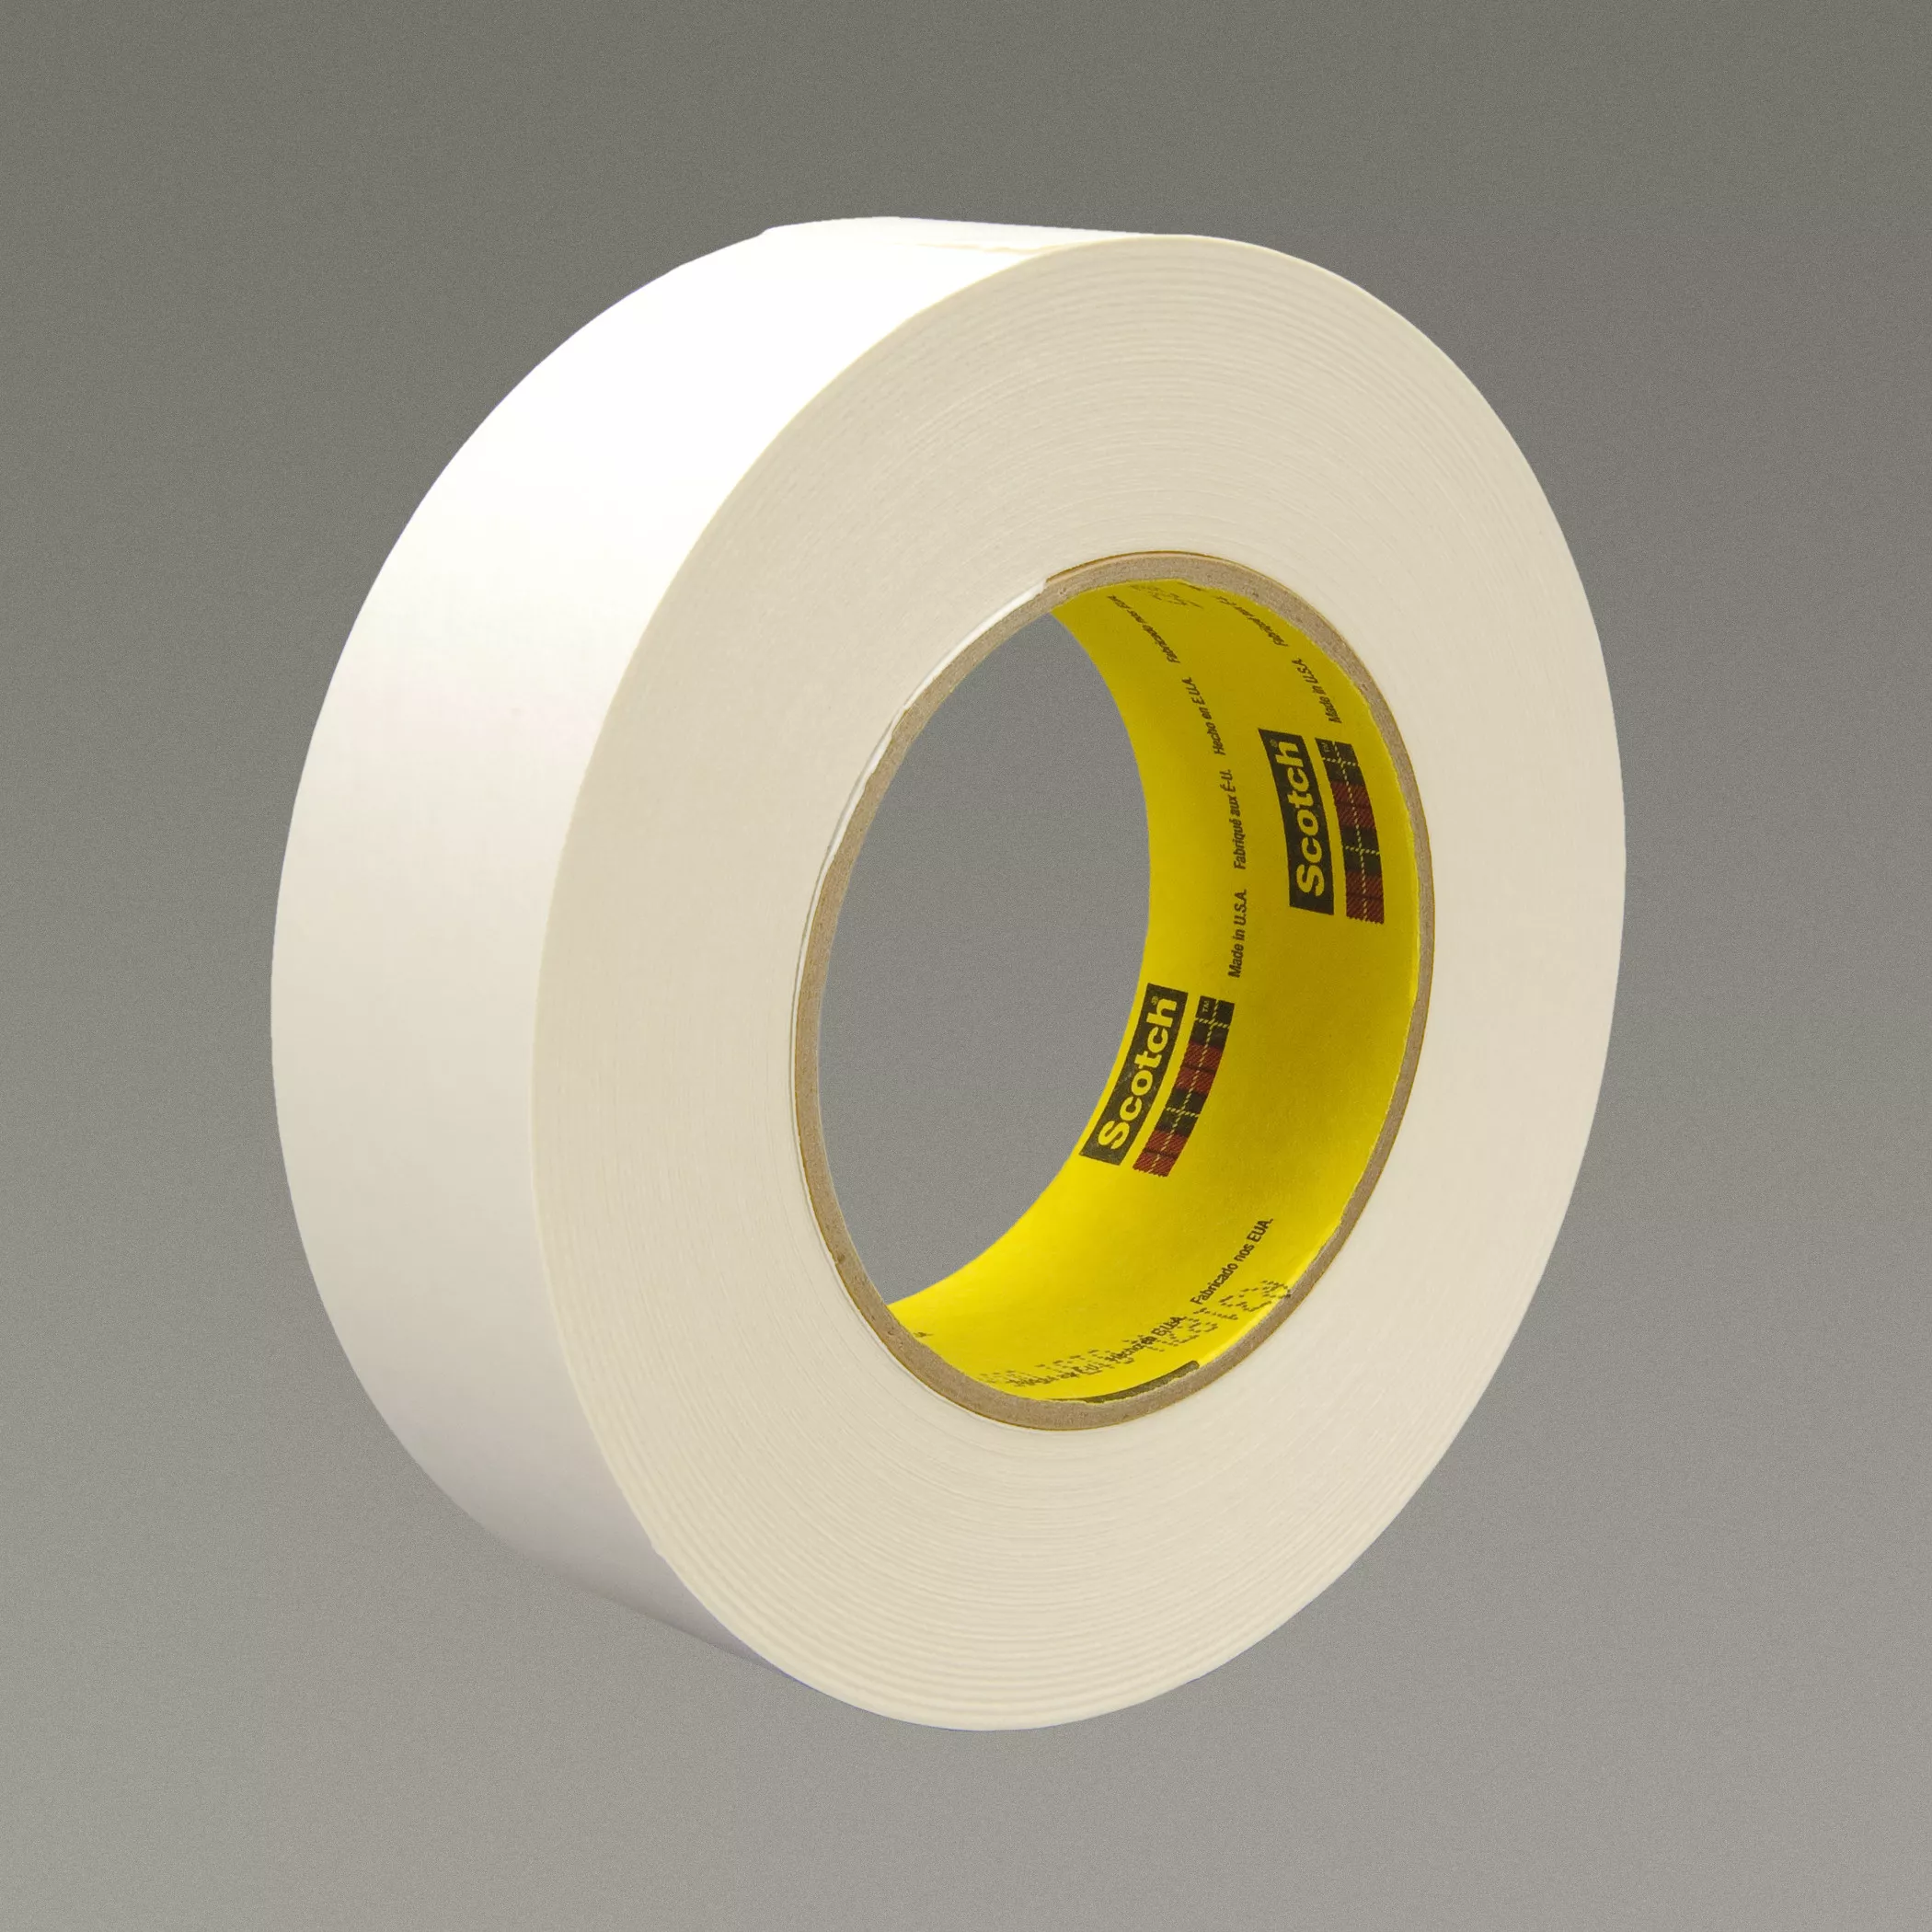 3M™ Repulpable Strong Single Coated Tape R3187, White, 96 mm x 55 m,
7.5
mil, 8 Roll/Case